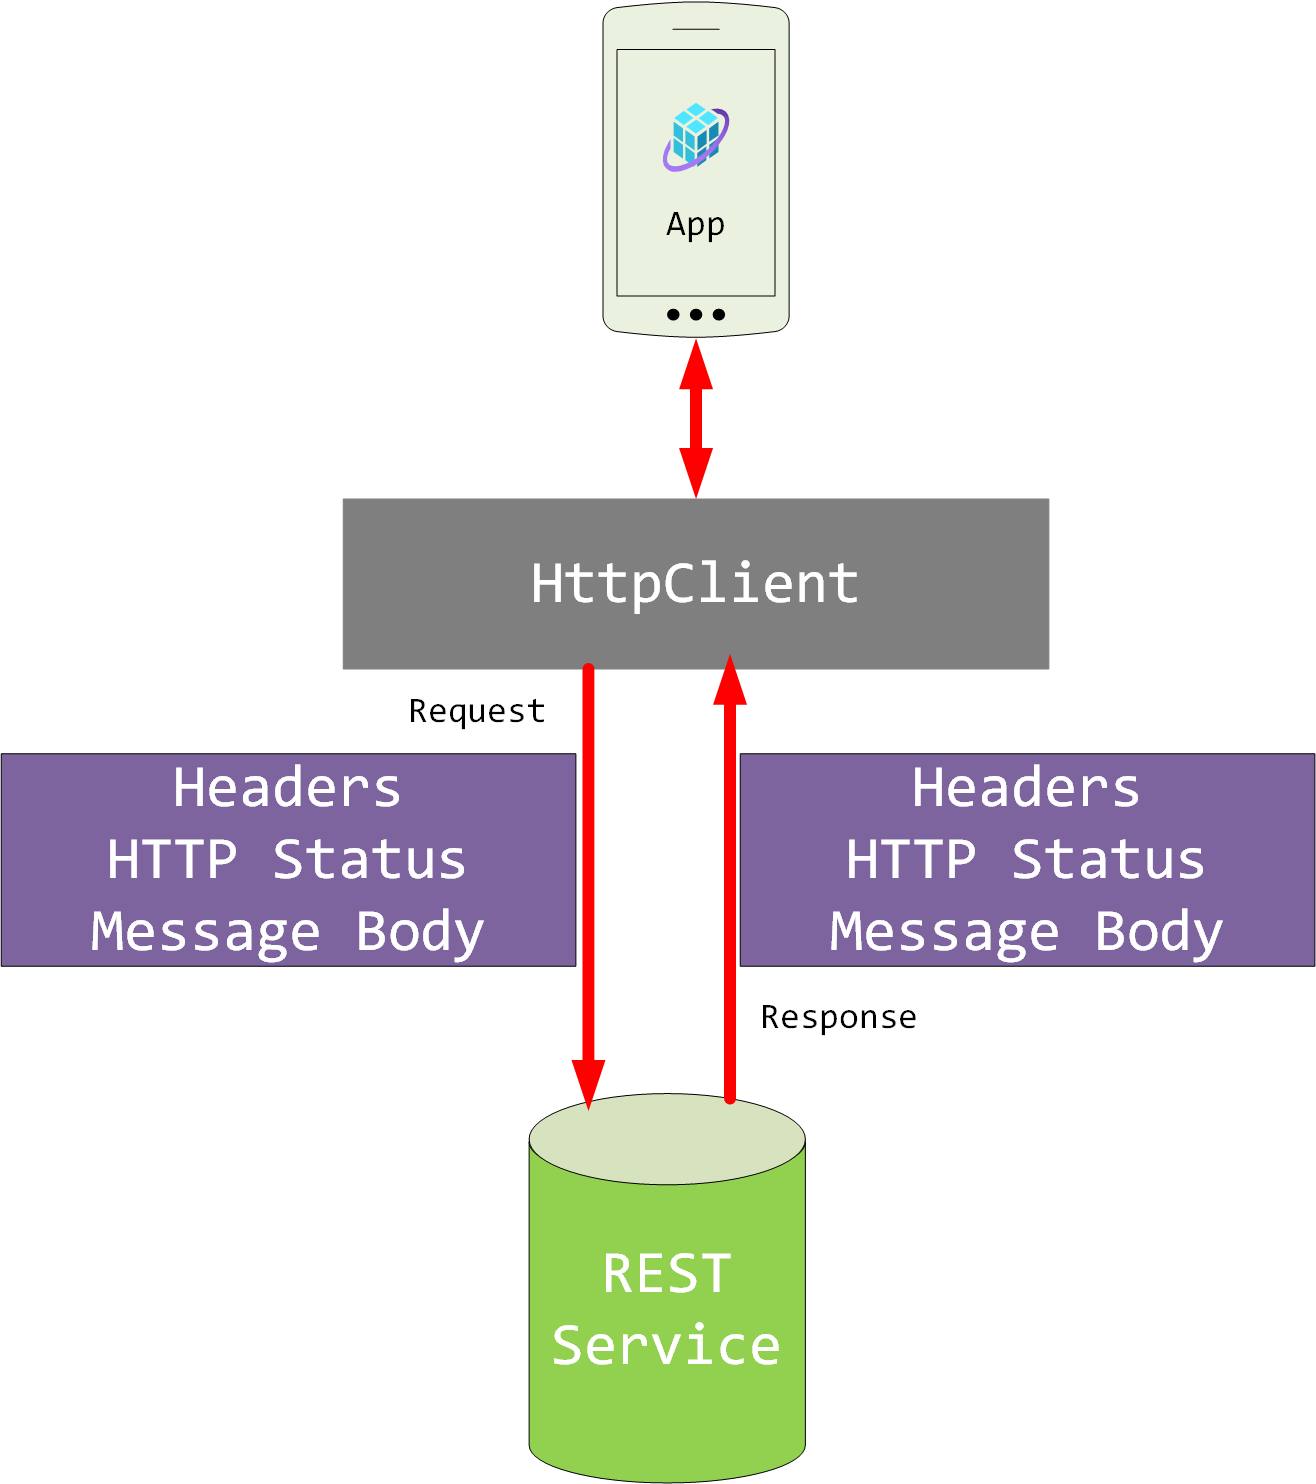 Diagram showing how a client app uses an HttpClient object to send and receive HTTP messages and responses